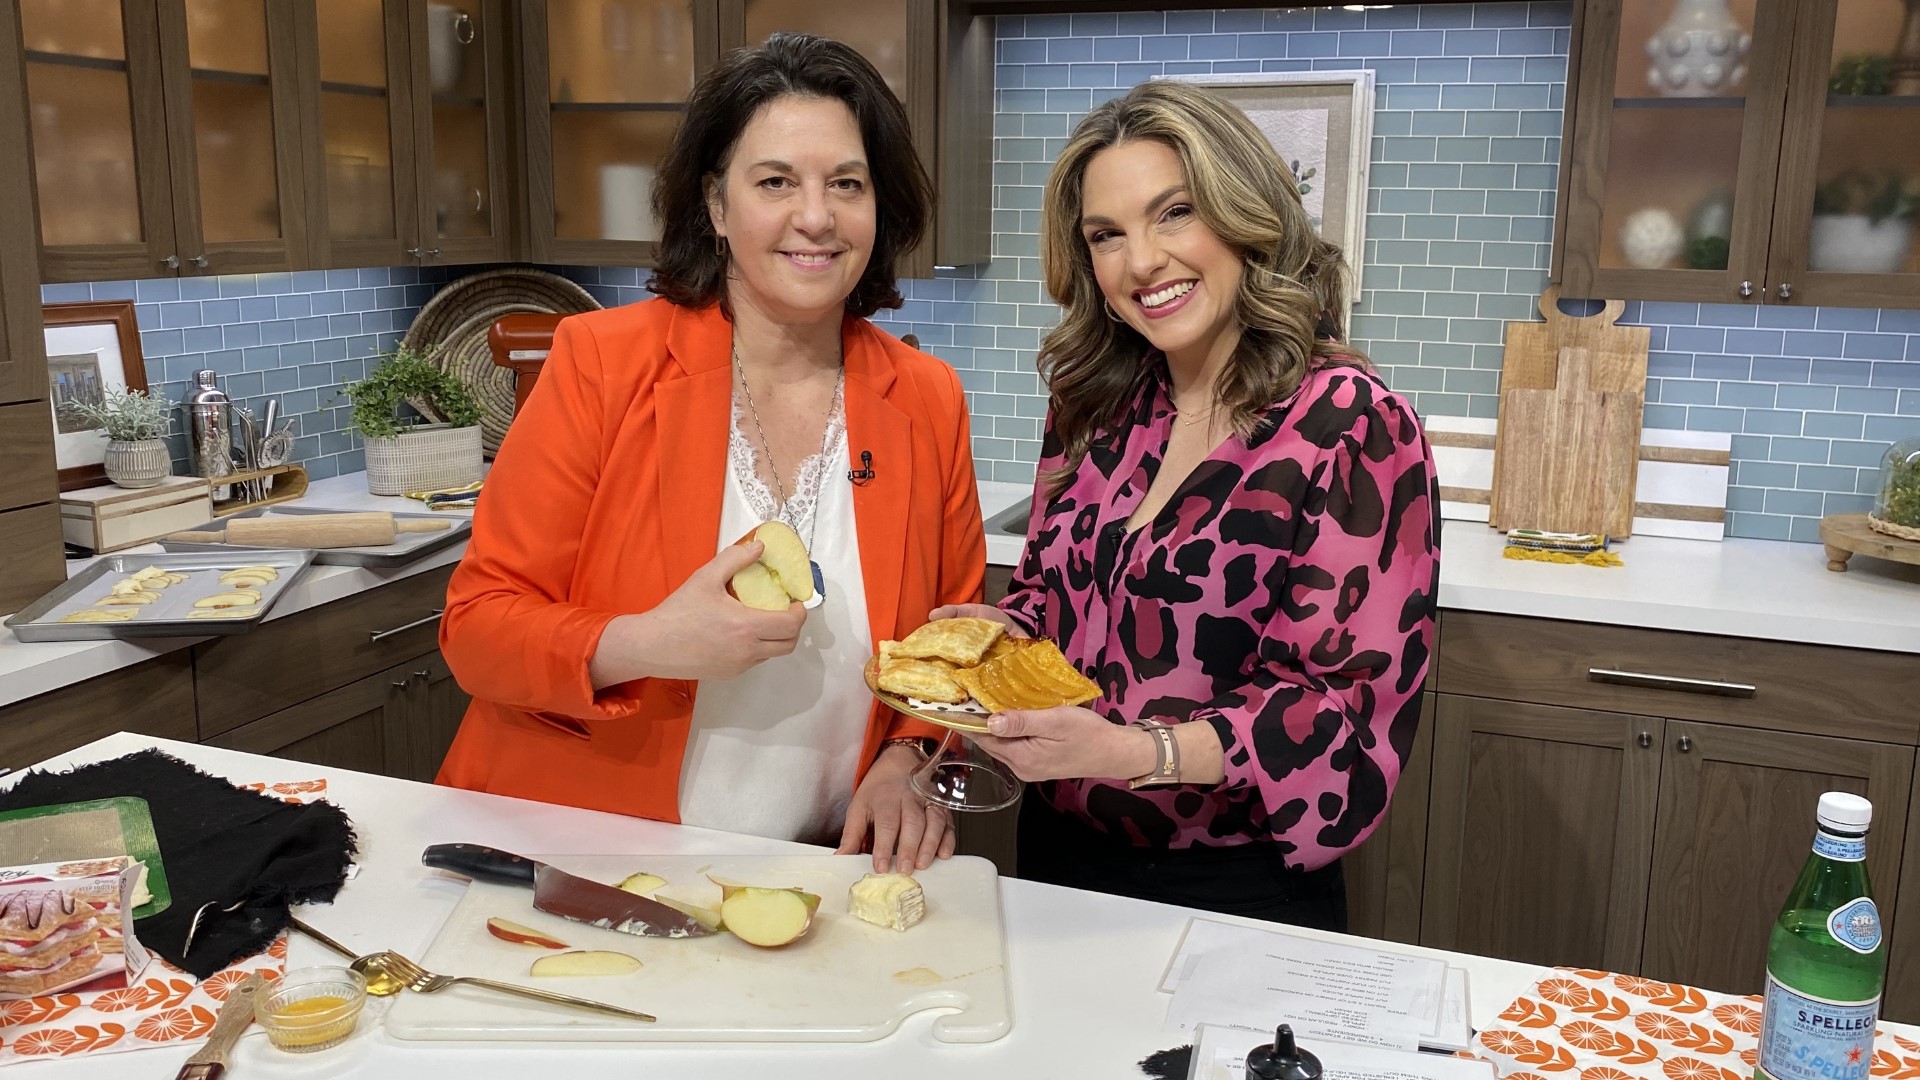 Try this recipe for hot honey apple tarts with brie alongside New Day Northwest host Amity Addrisi and Suzie Wiley.